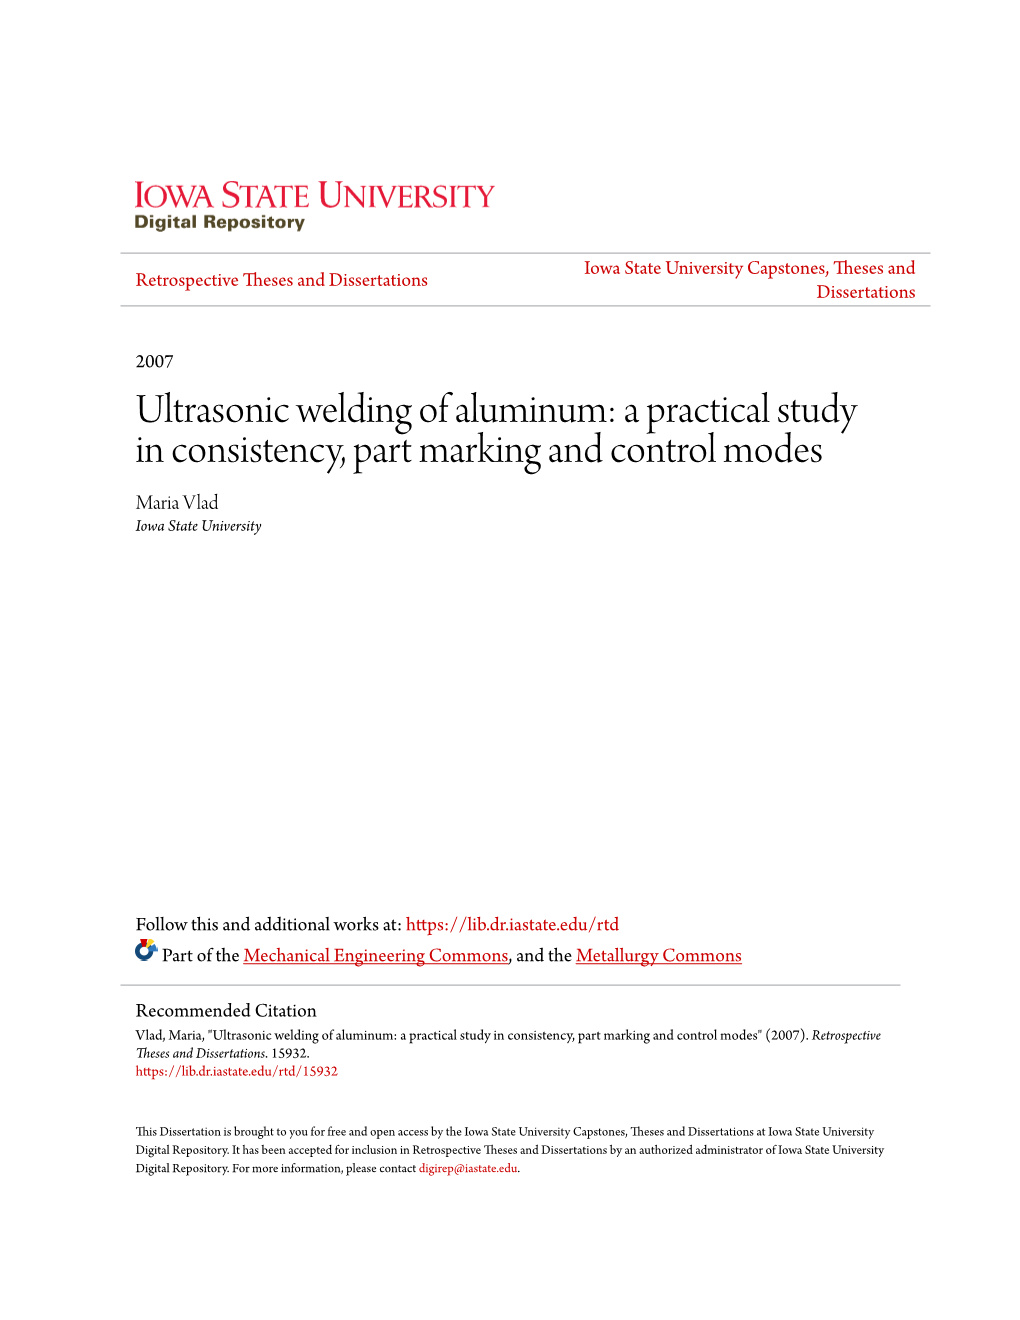 Ultrasonic Welding of Aluminum: a Practical Study in Consistency, Part Marking and Control Modes Maria Vlad Iowa State University